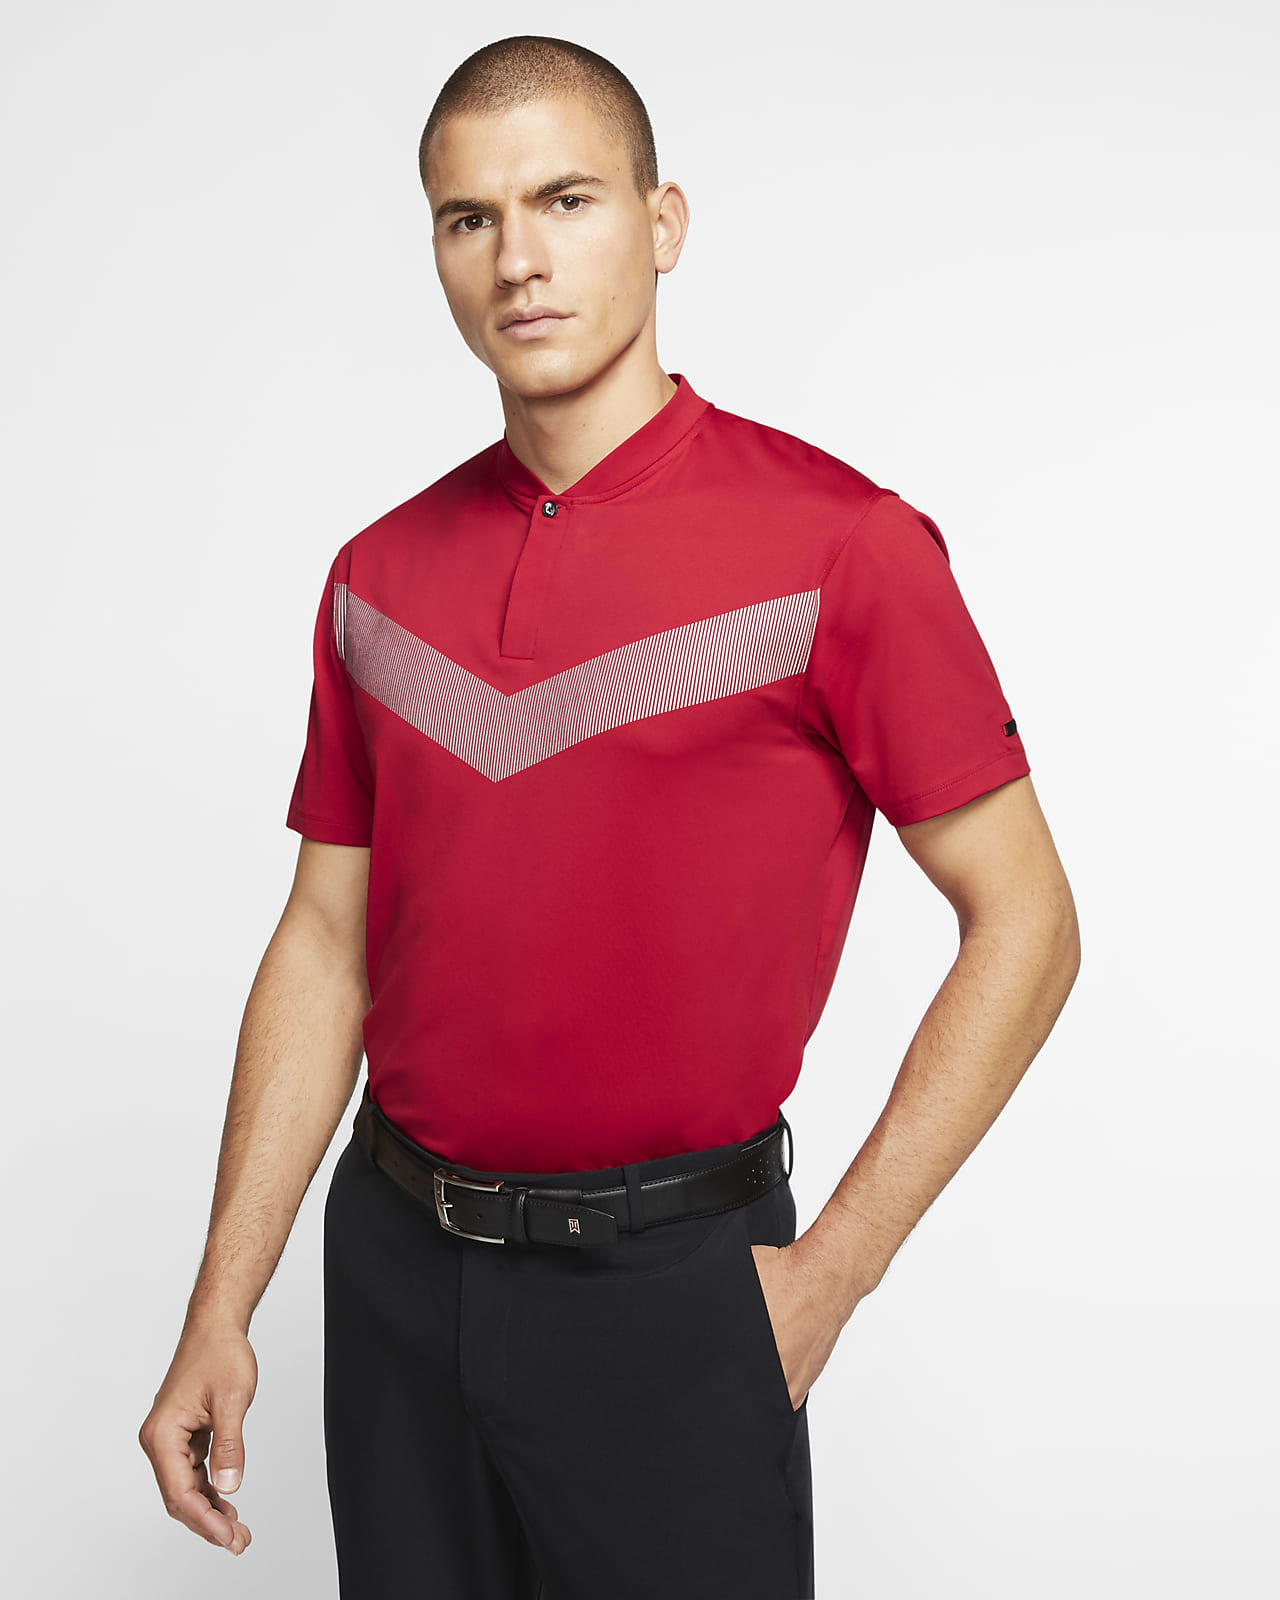 tiger woods red golf shirts